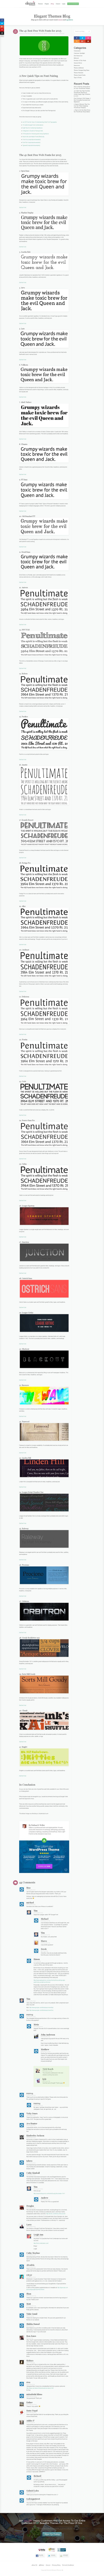 The 41 Best Free Web Fonts for 2015 | Elegant Themes Blog